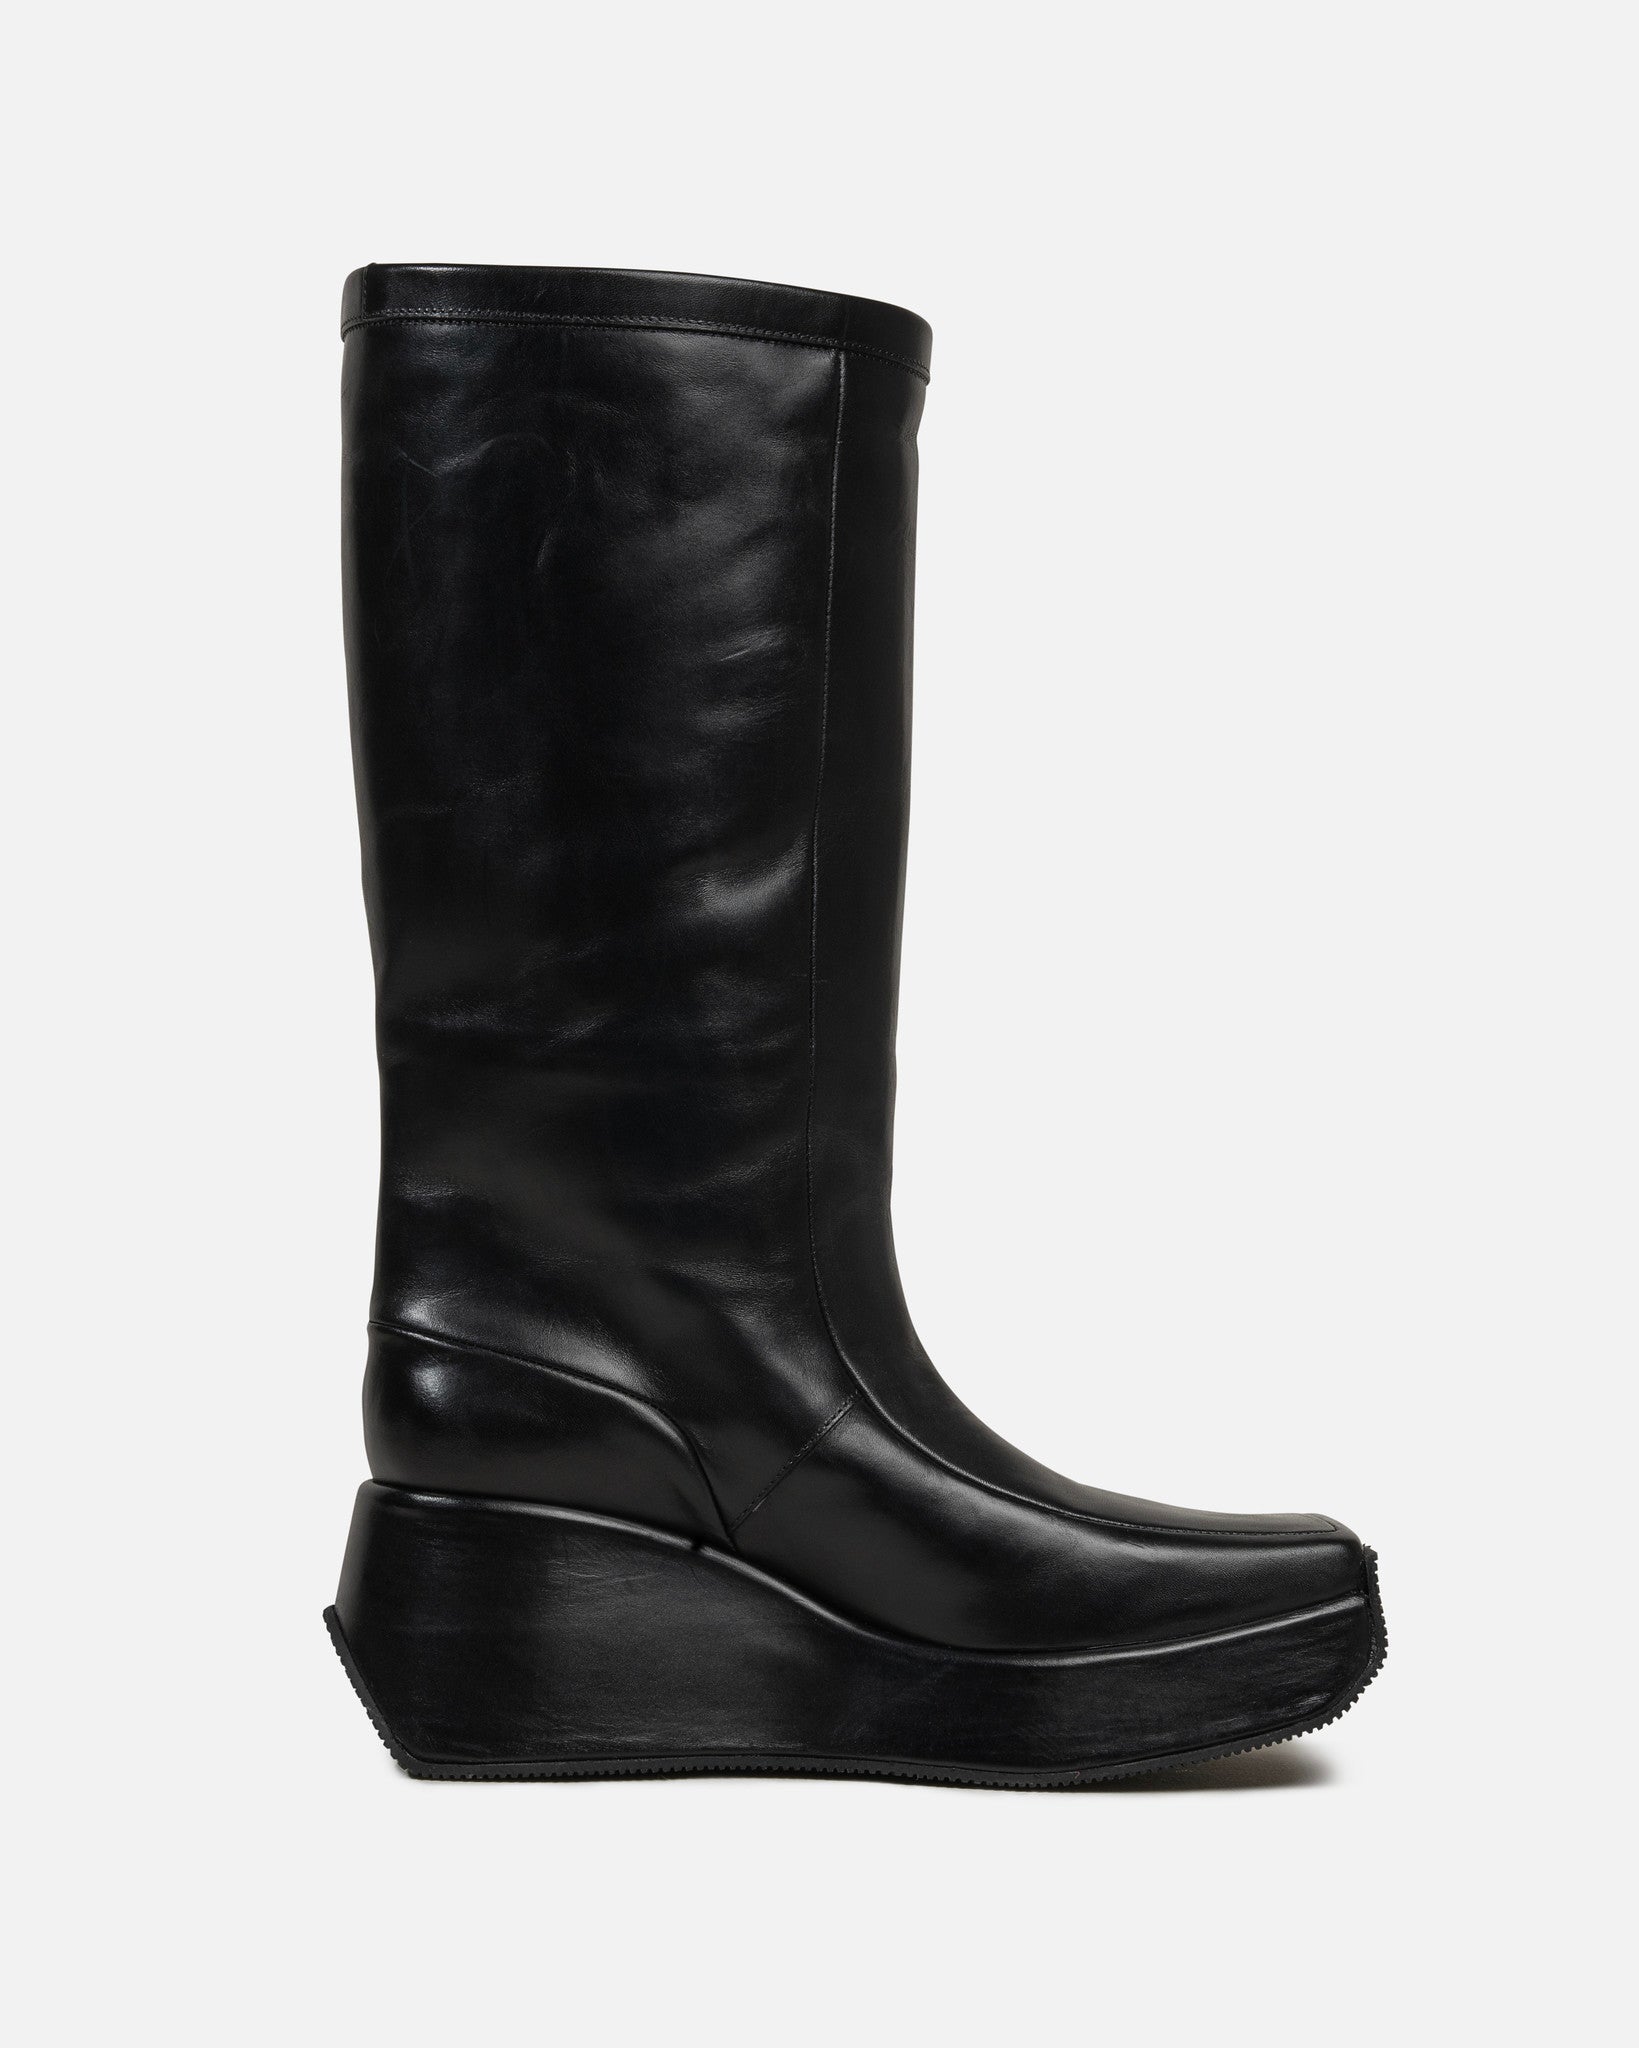 Raf Simons Men's Shoes Boots with Platform Sole in Black